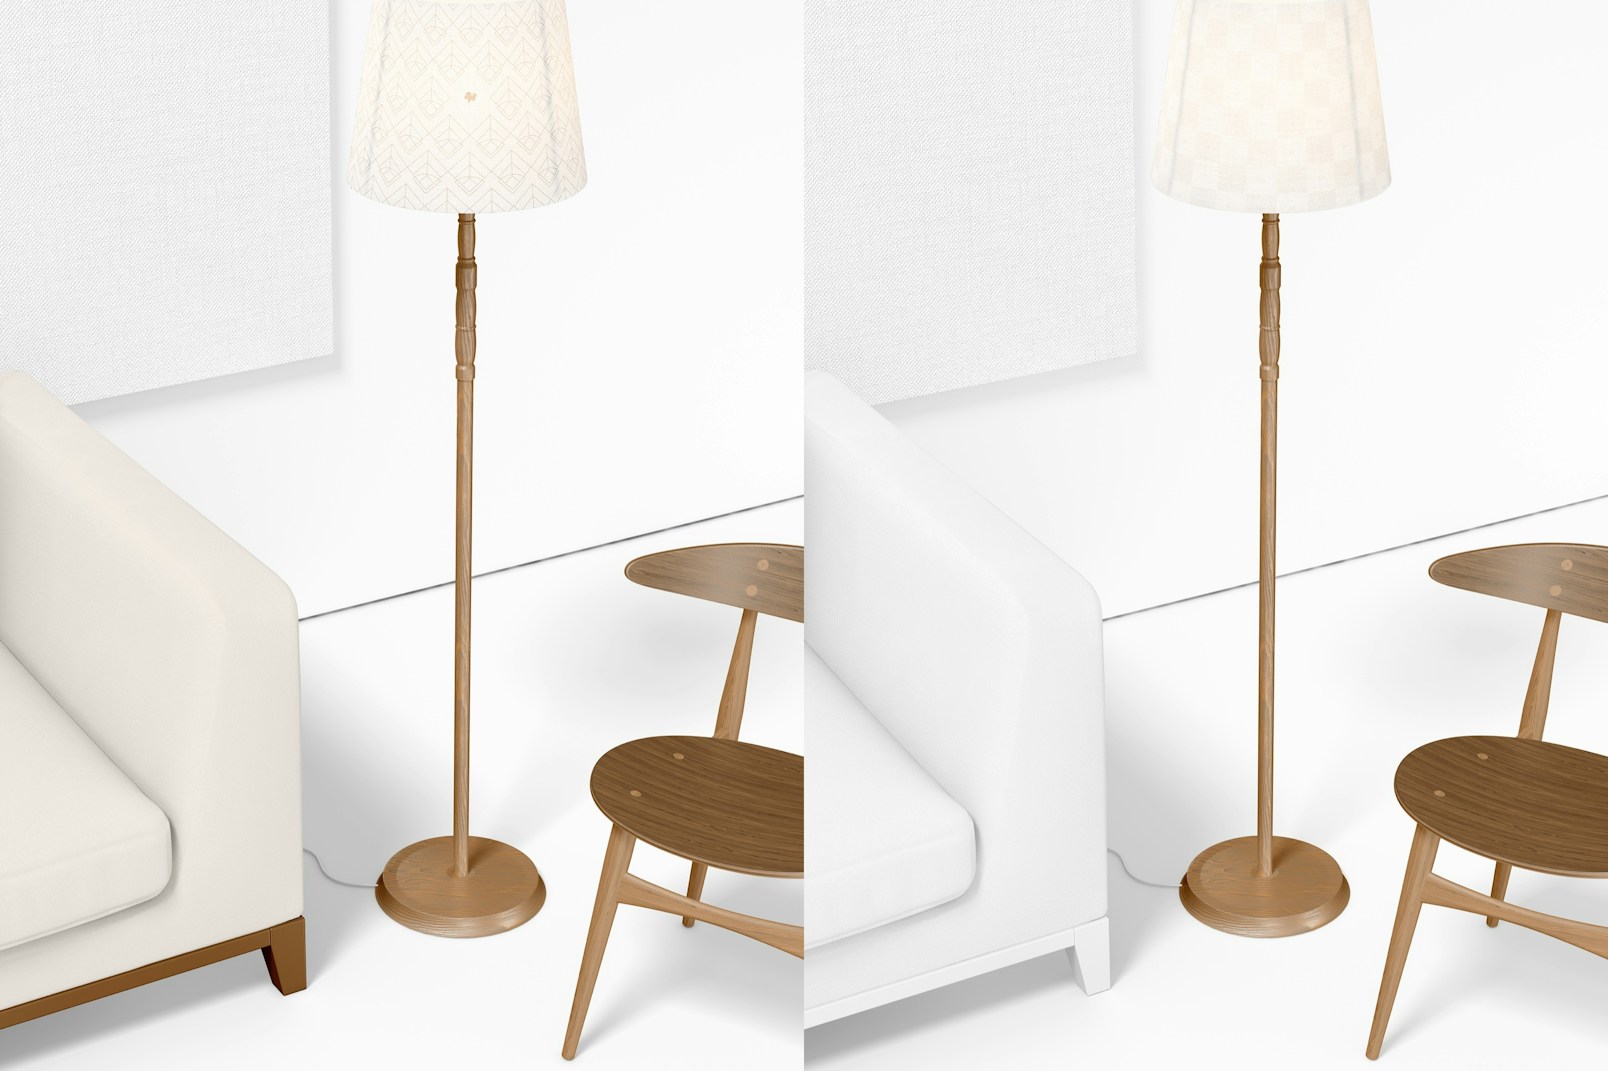 Floor Lamp with Furniture Mockup